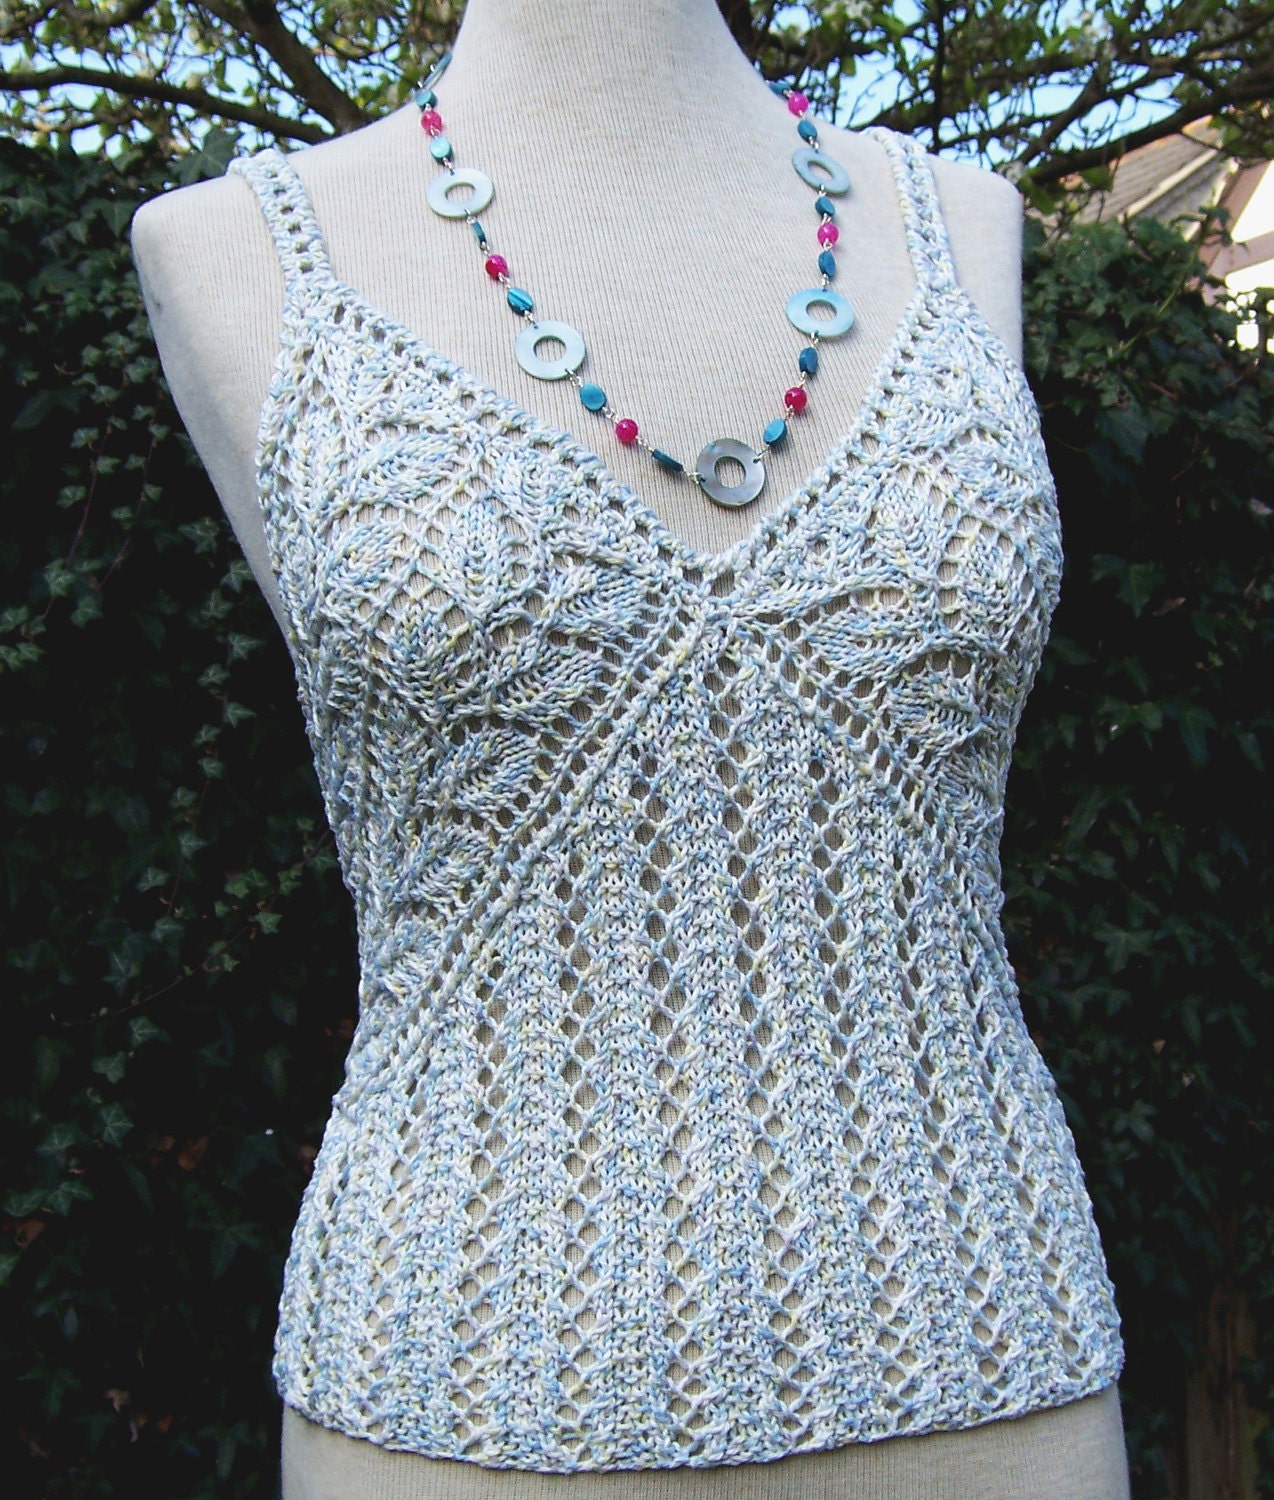 Handknitted Women Lace Top Summer Tank Blue White and